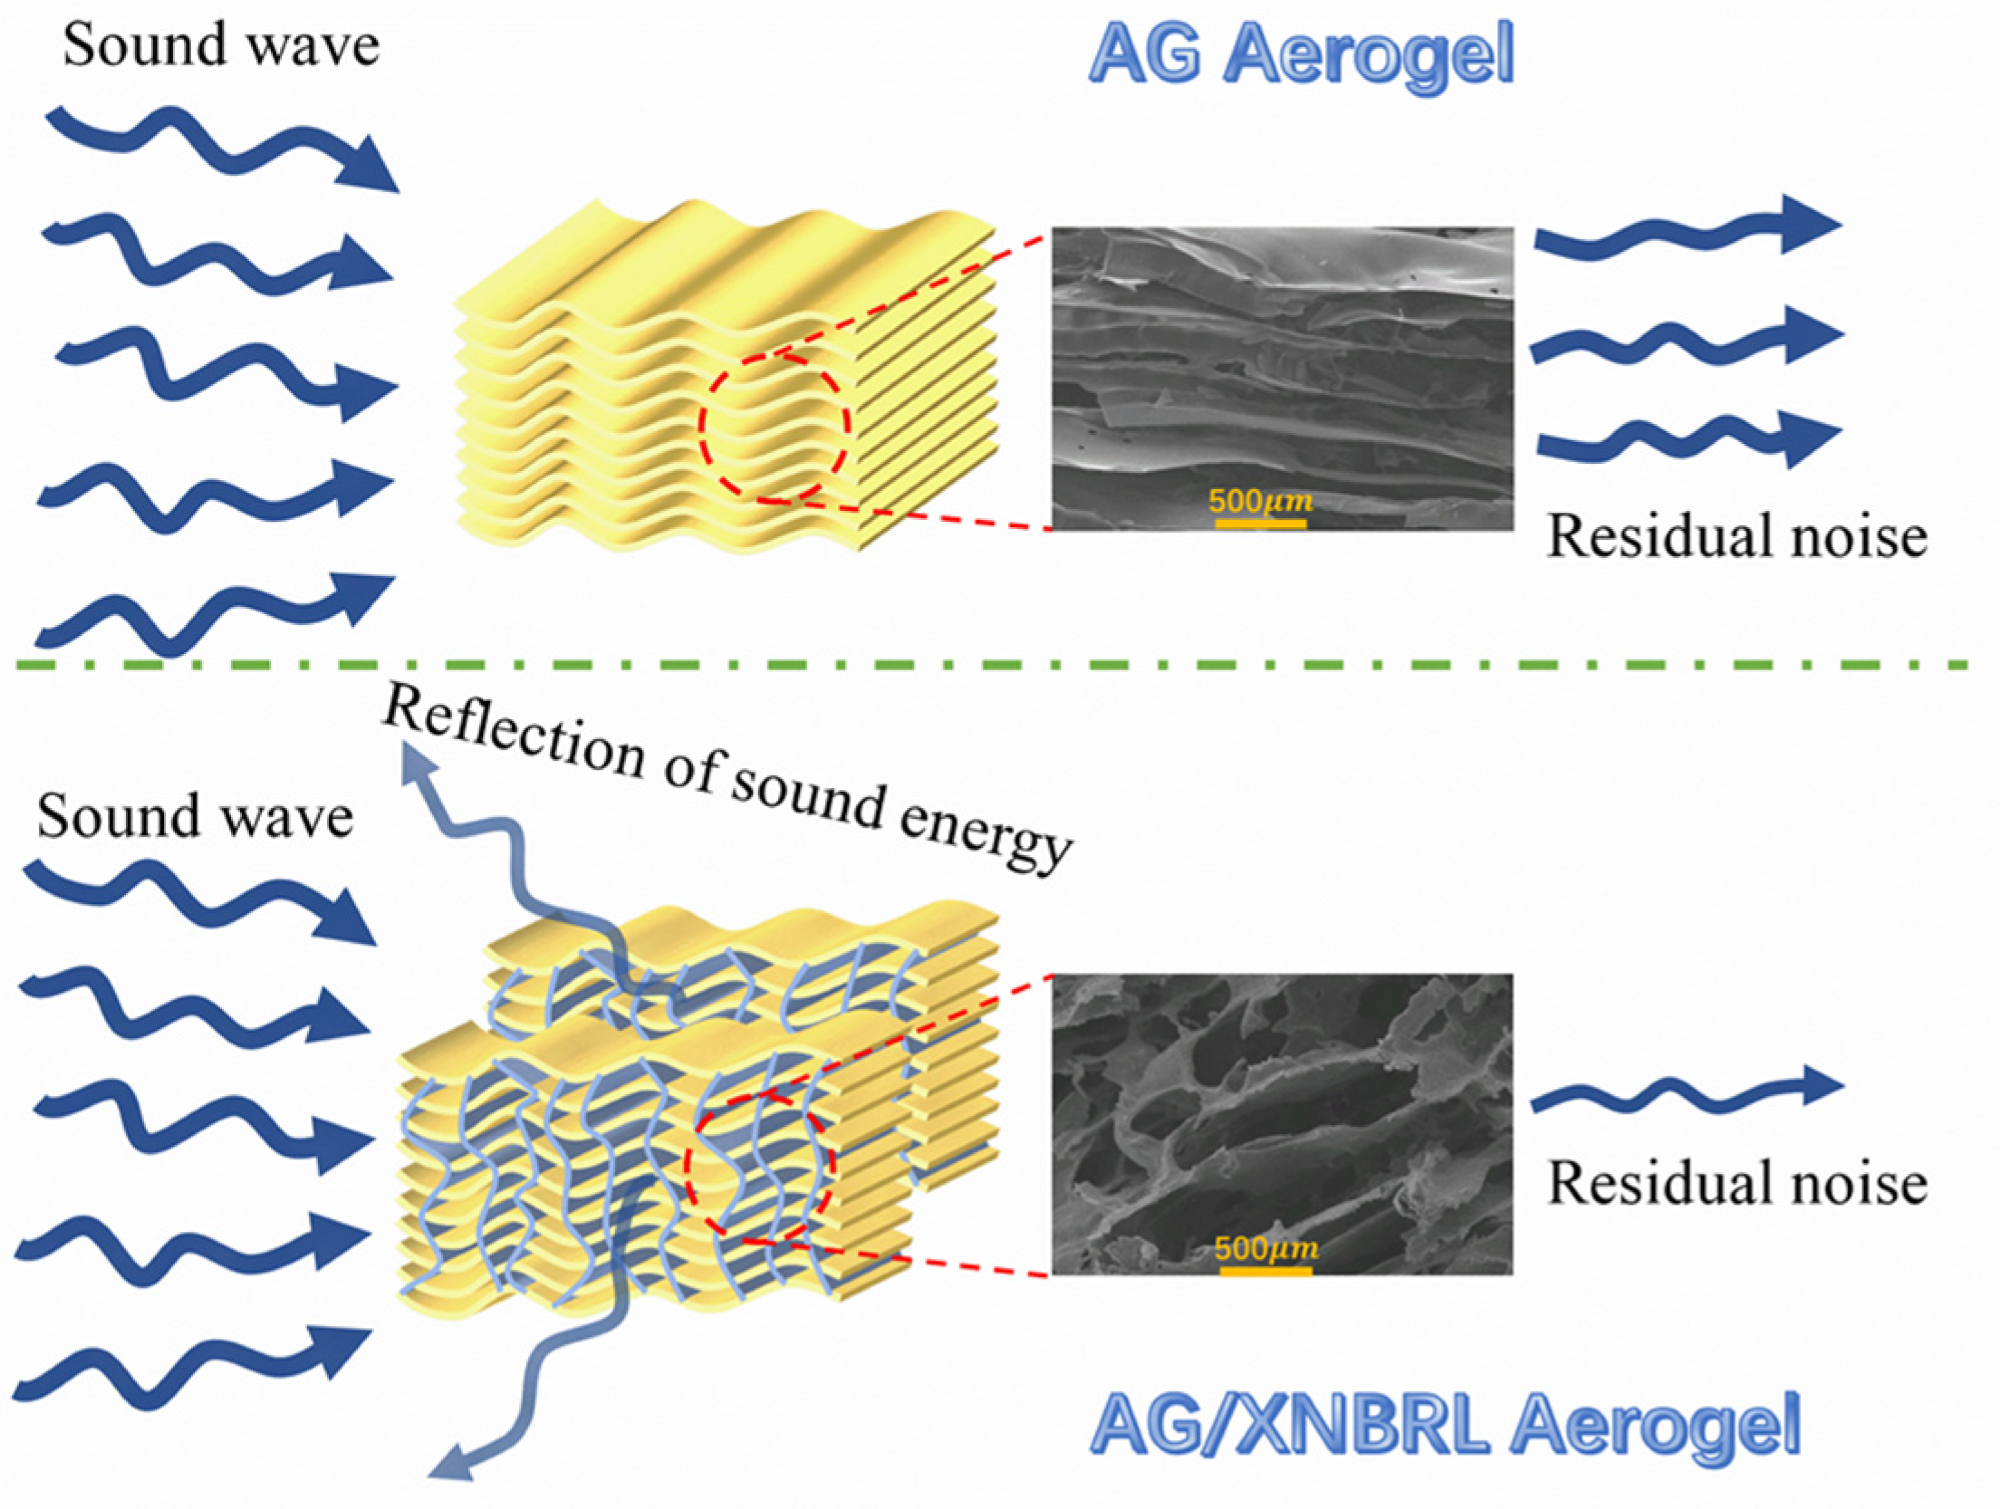 Sound absorption mechanism of AG aerogels and AG/XNBRL composite aerogels.